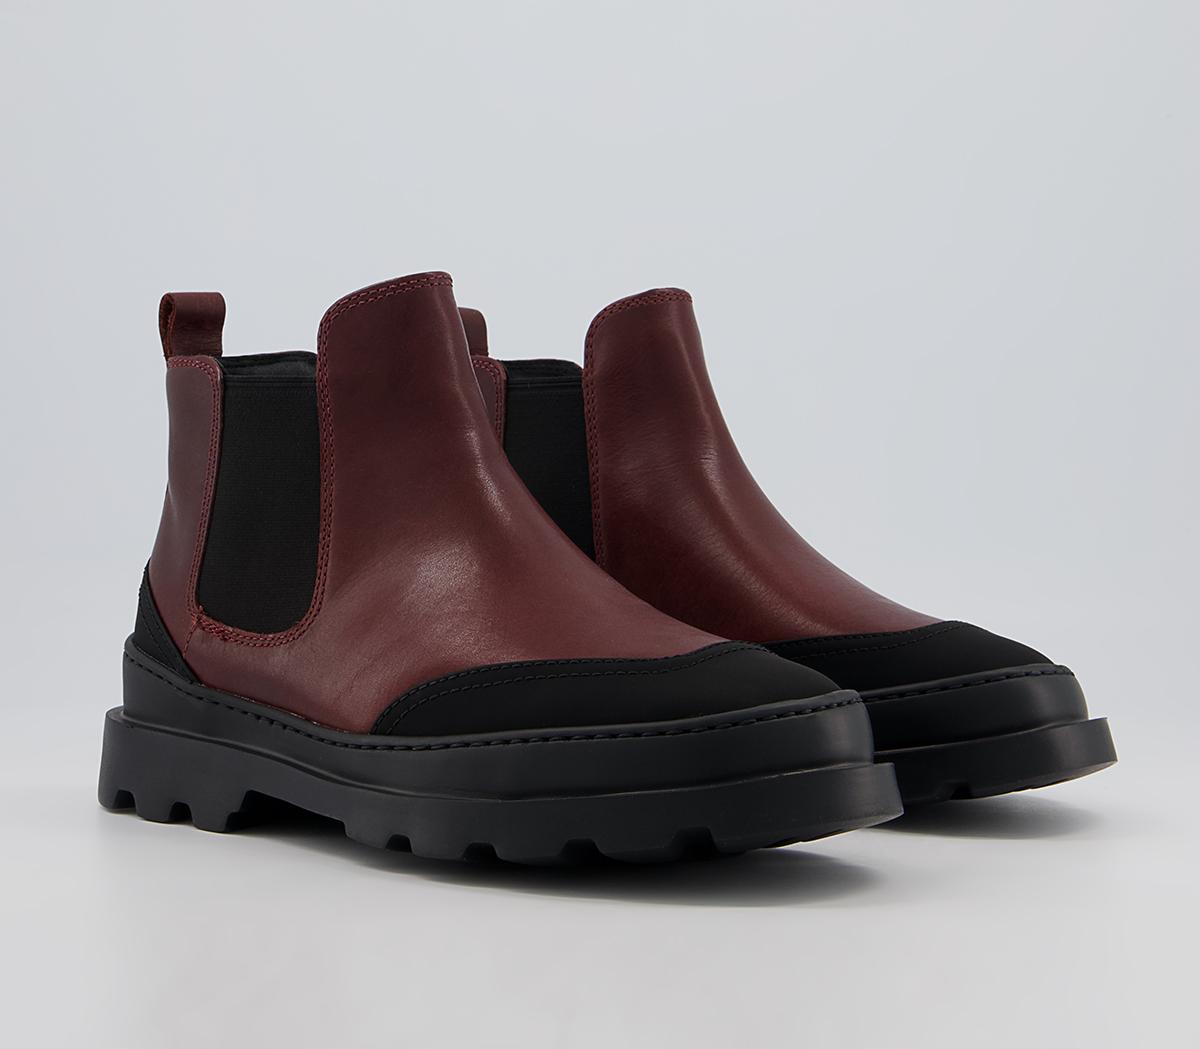 Camper Brutus Chelsea Boots Burgundy - Women's Ankle Boots